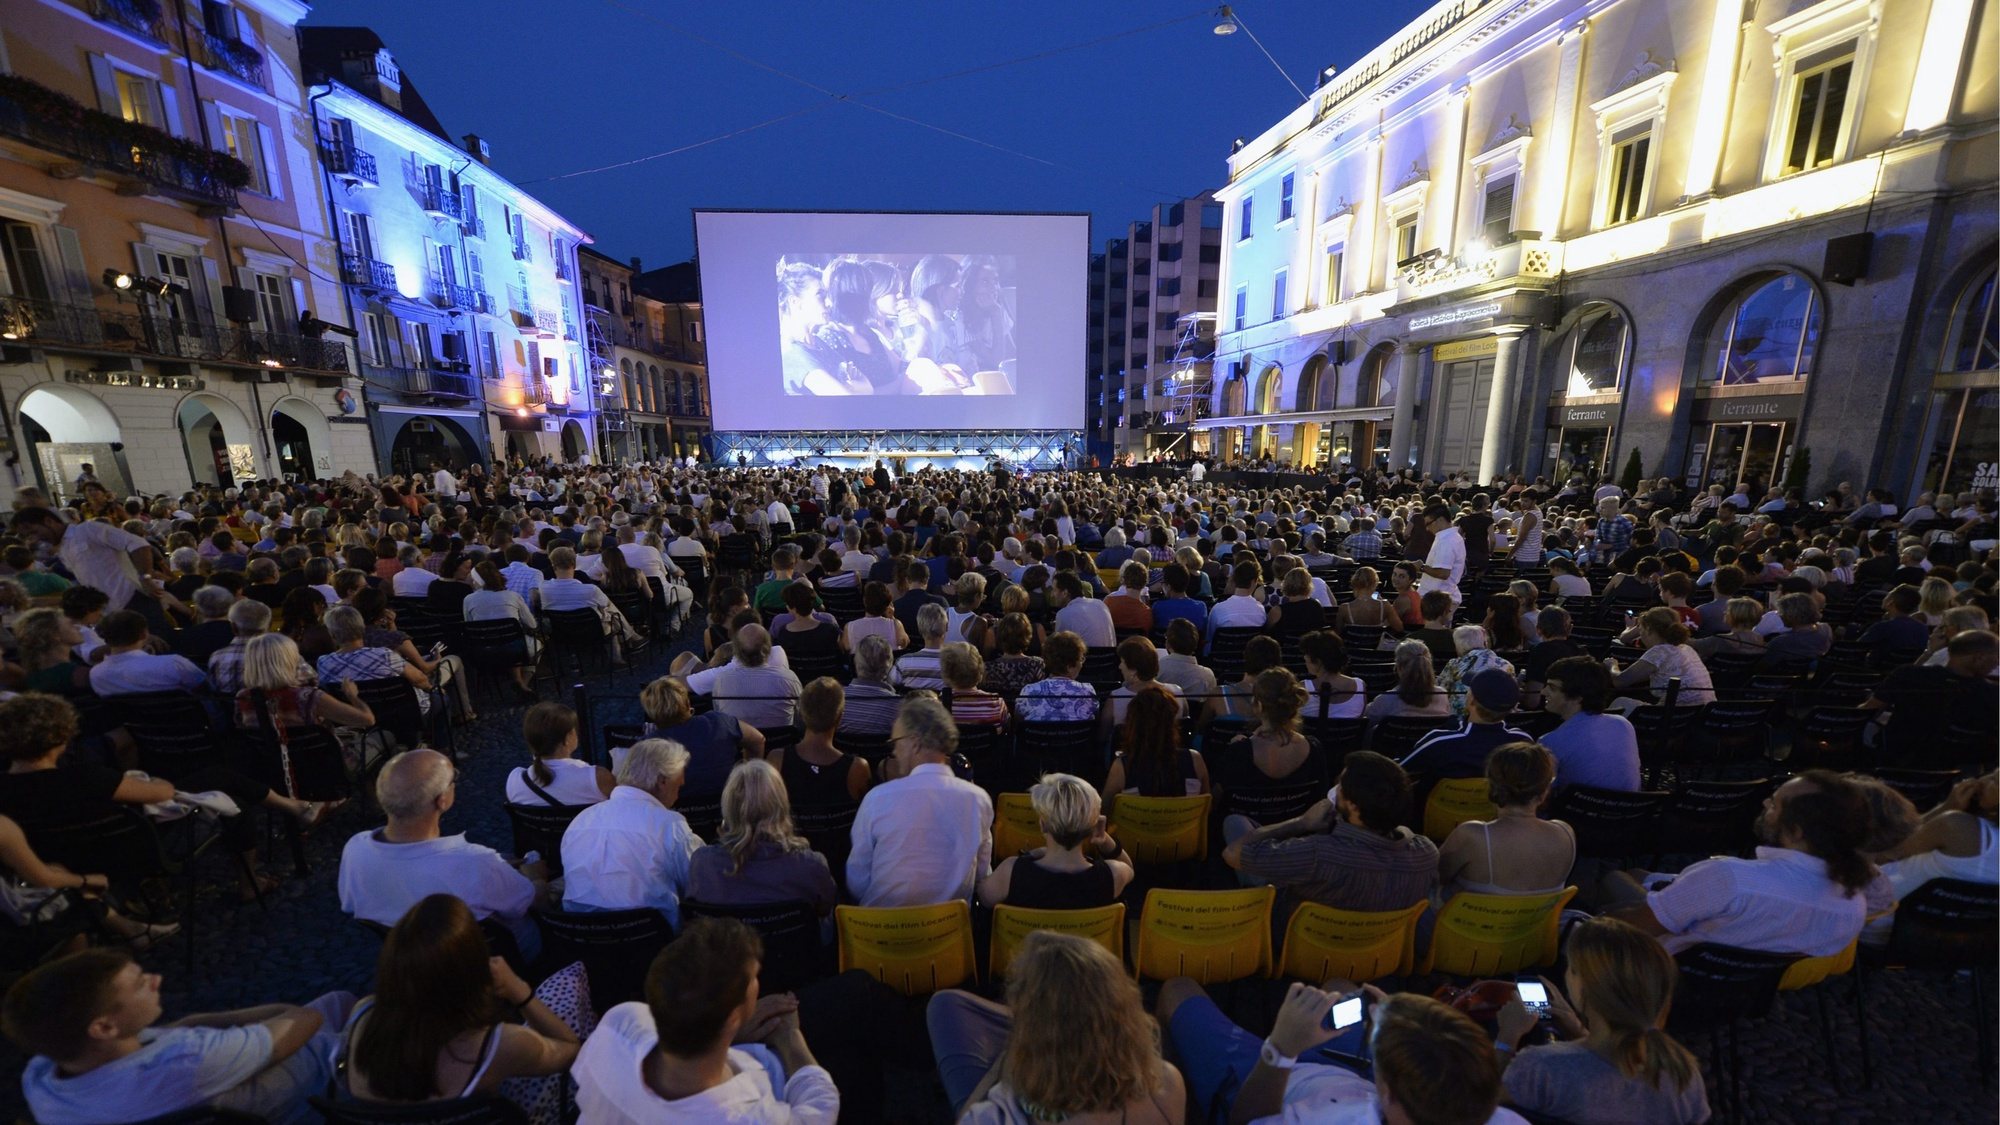 epa03815183 A general view of the audience on the Piazza Grande attending the screening of Chinatown by Roman Polanski (USA, 1974) as part of the pre-Locarno Film Festival activities in Locarno, Switzerland, 06 August 2013. The 66th Locarno Film Festival runs from 07 to 17 August 2013.  EPA/URS FLUEELER